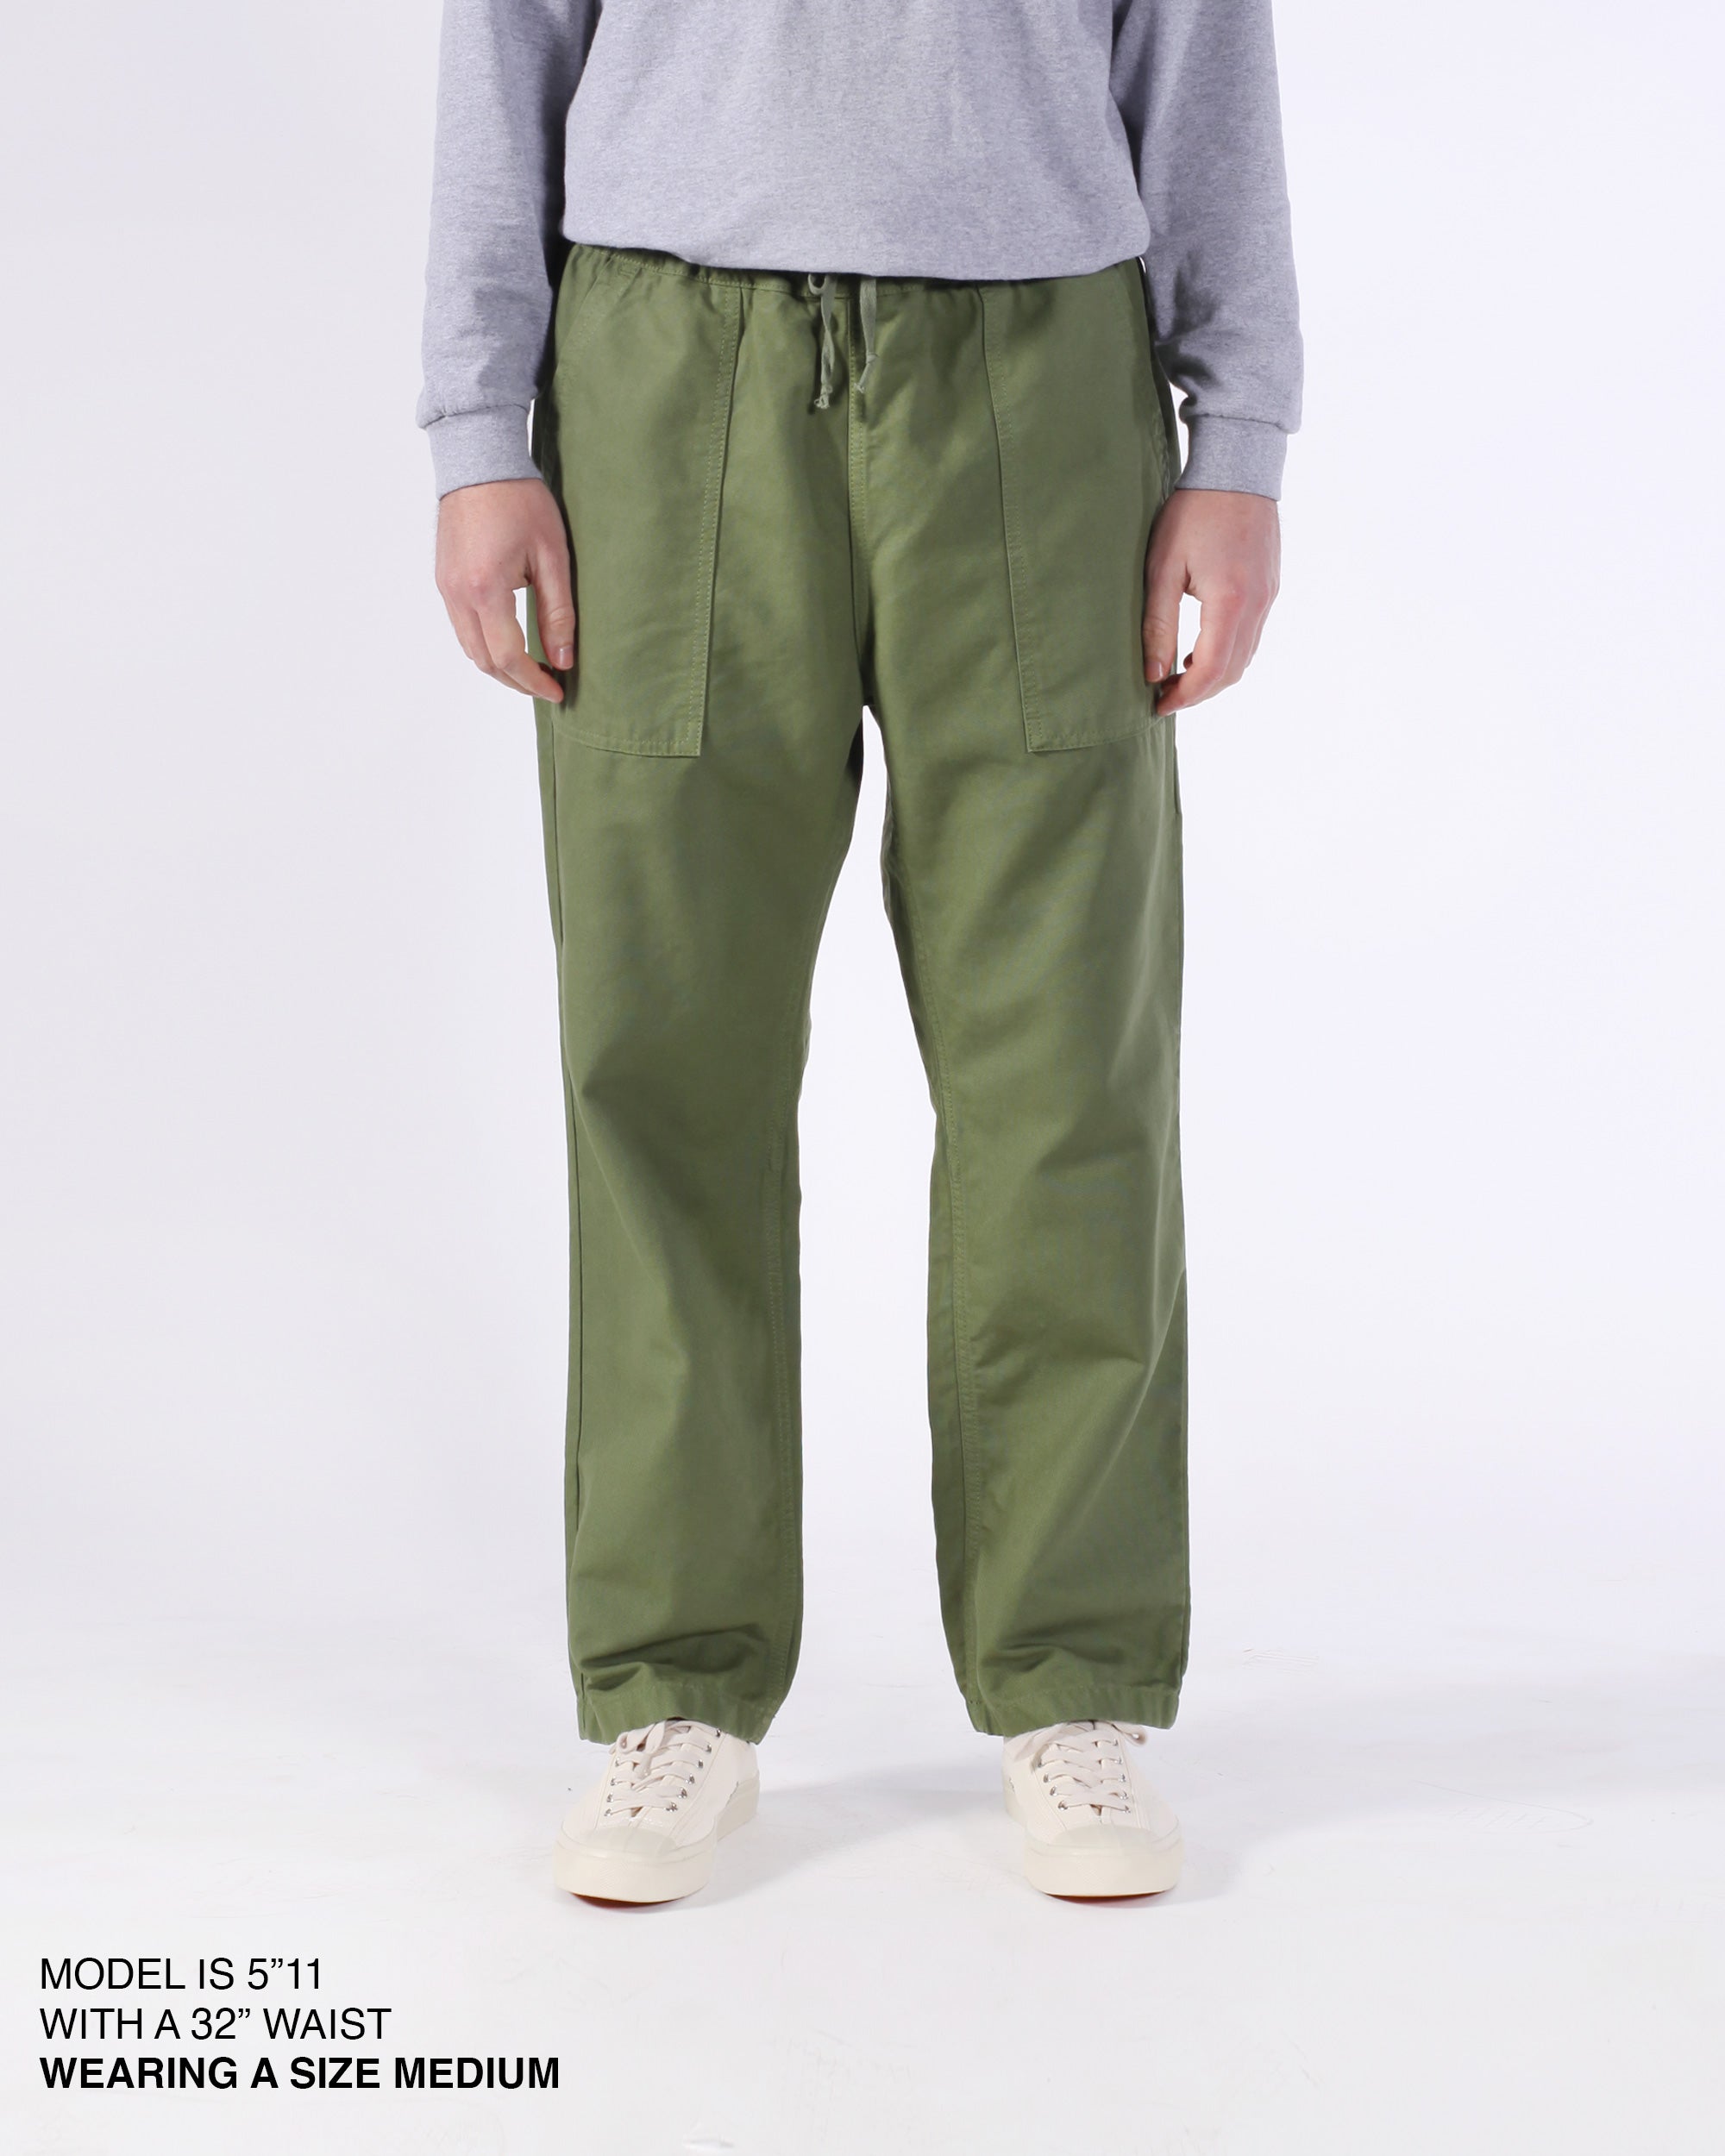 Service Works - Classic Chef Pants - Grey